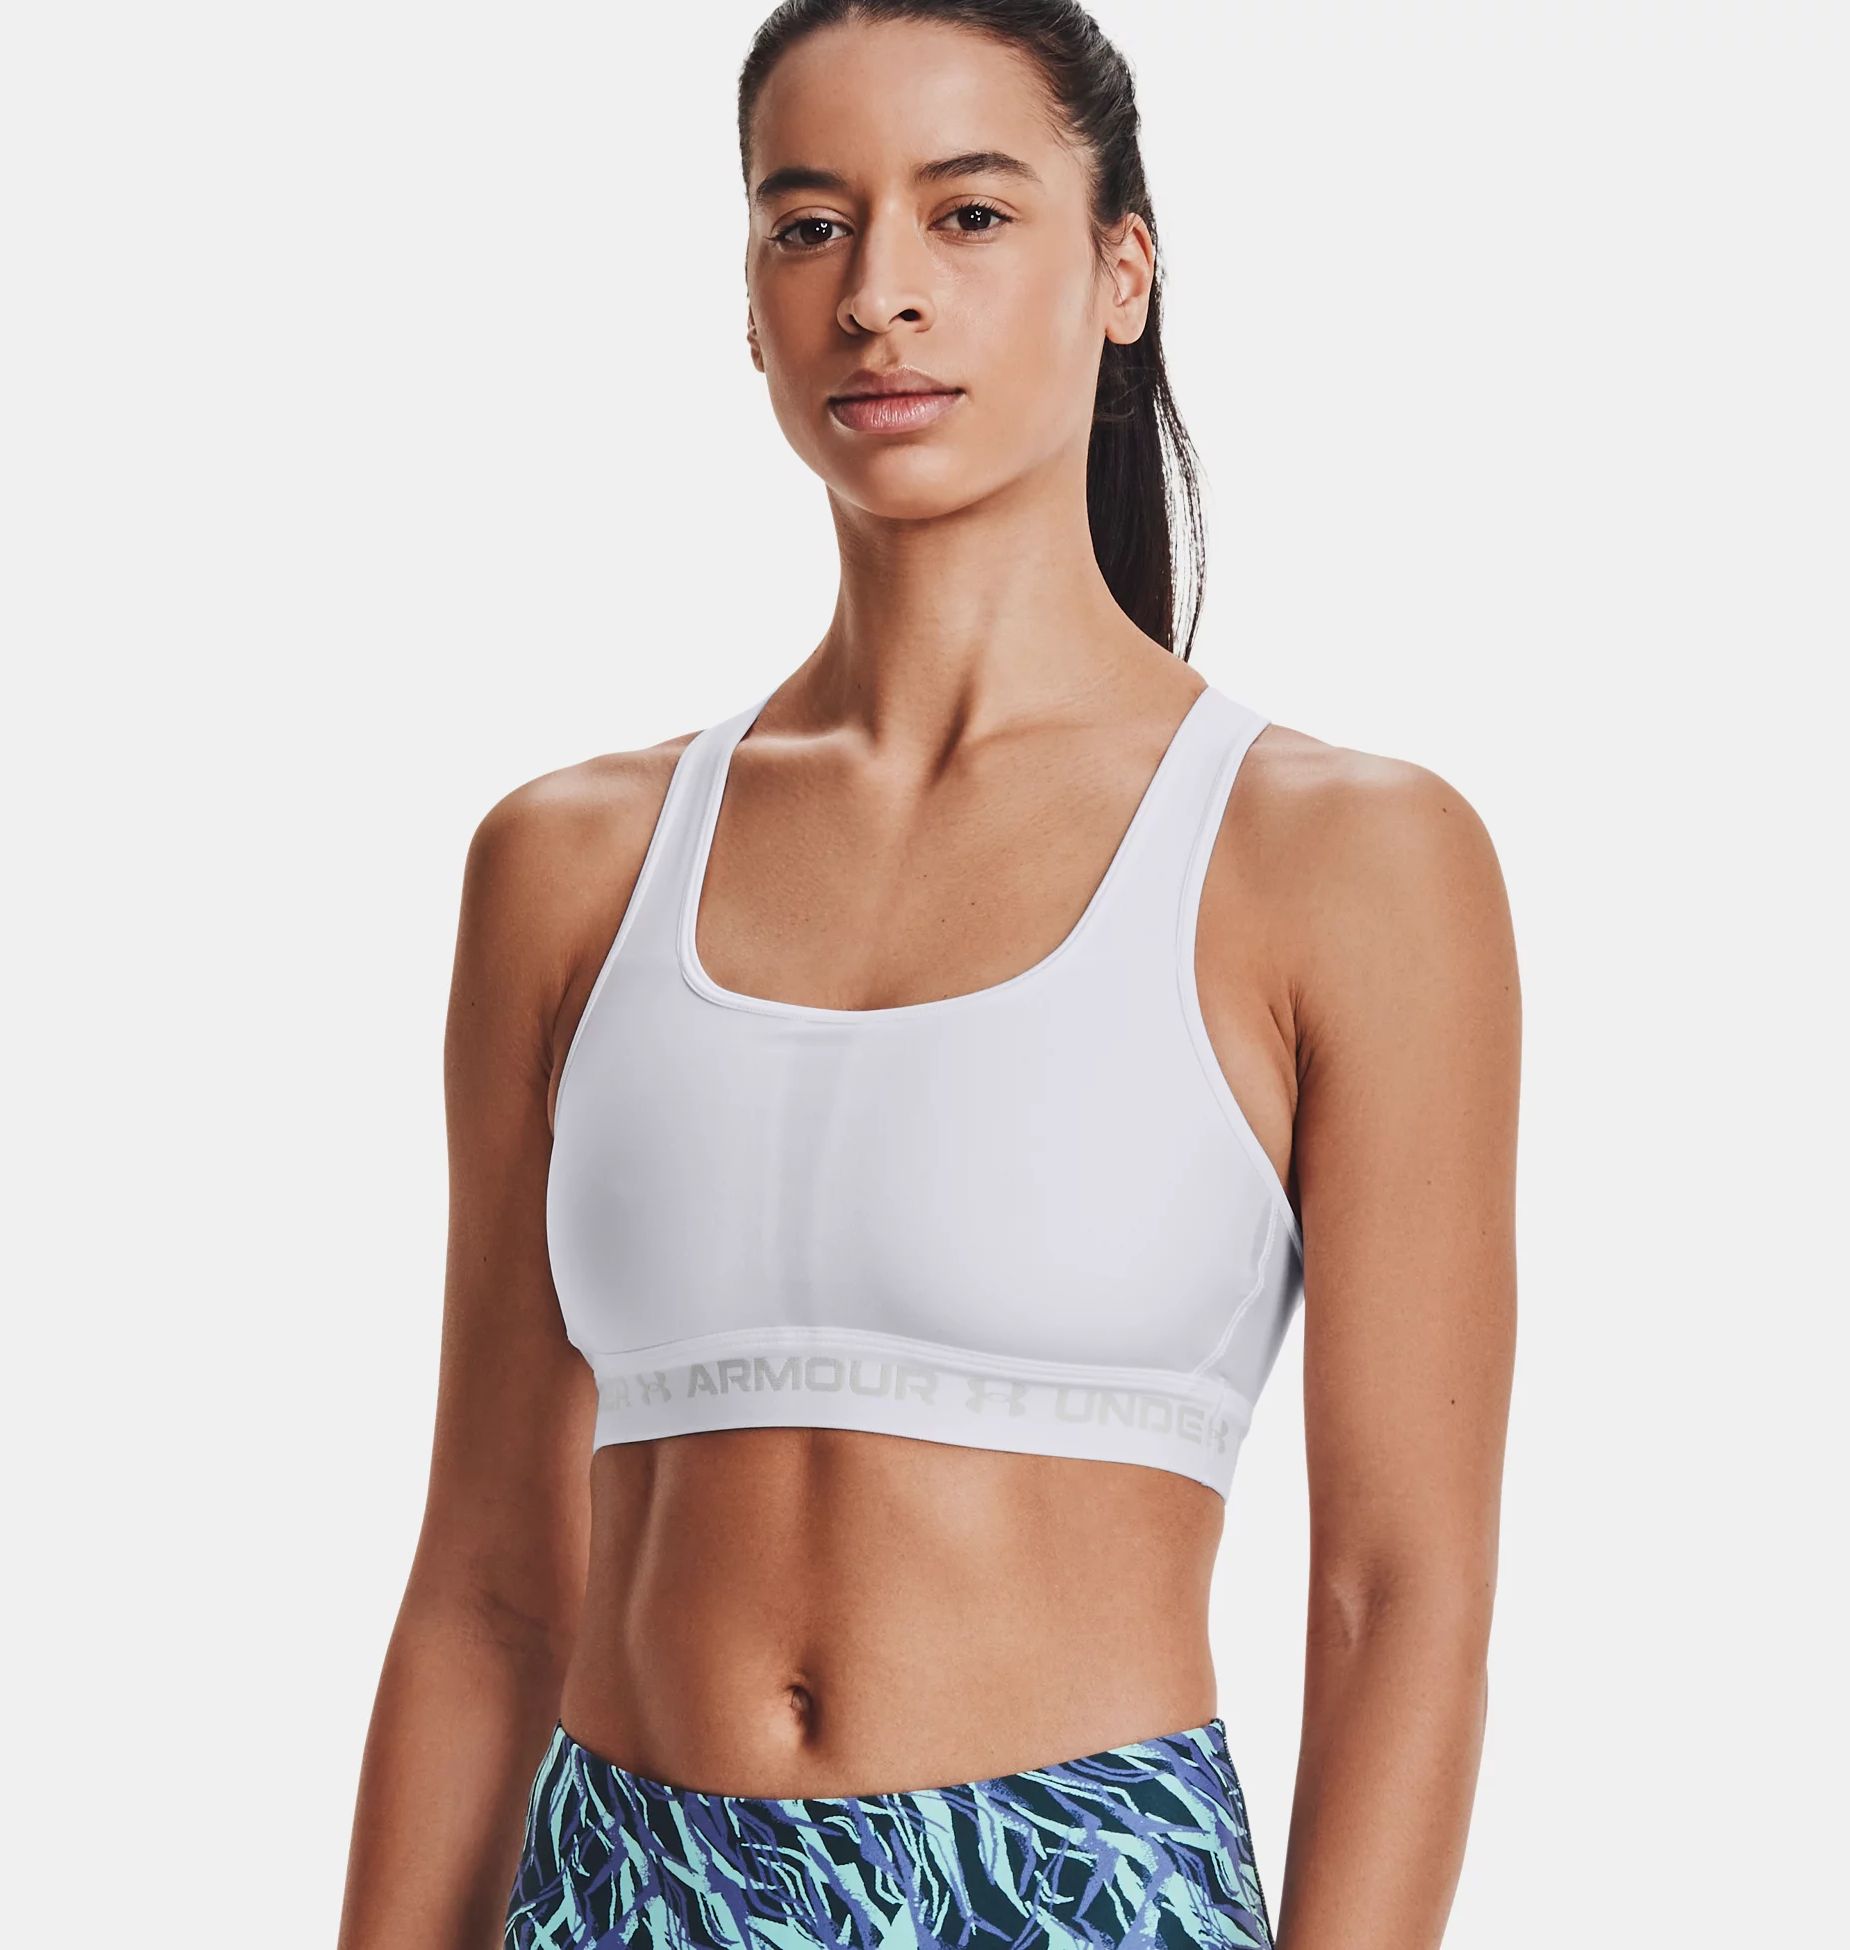 https://img2.sportconcept.com/backend_nou/content/images/fitness-under-armour%20mid-crossback-sports-bra-20230331163439.jpg